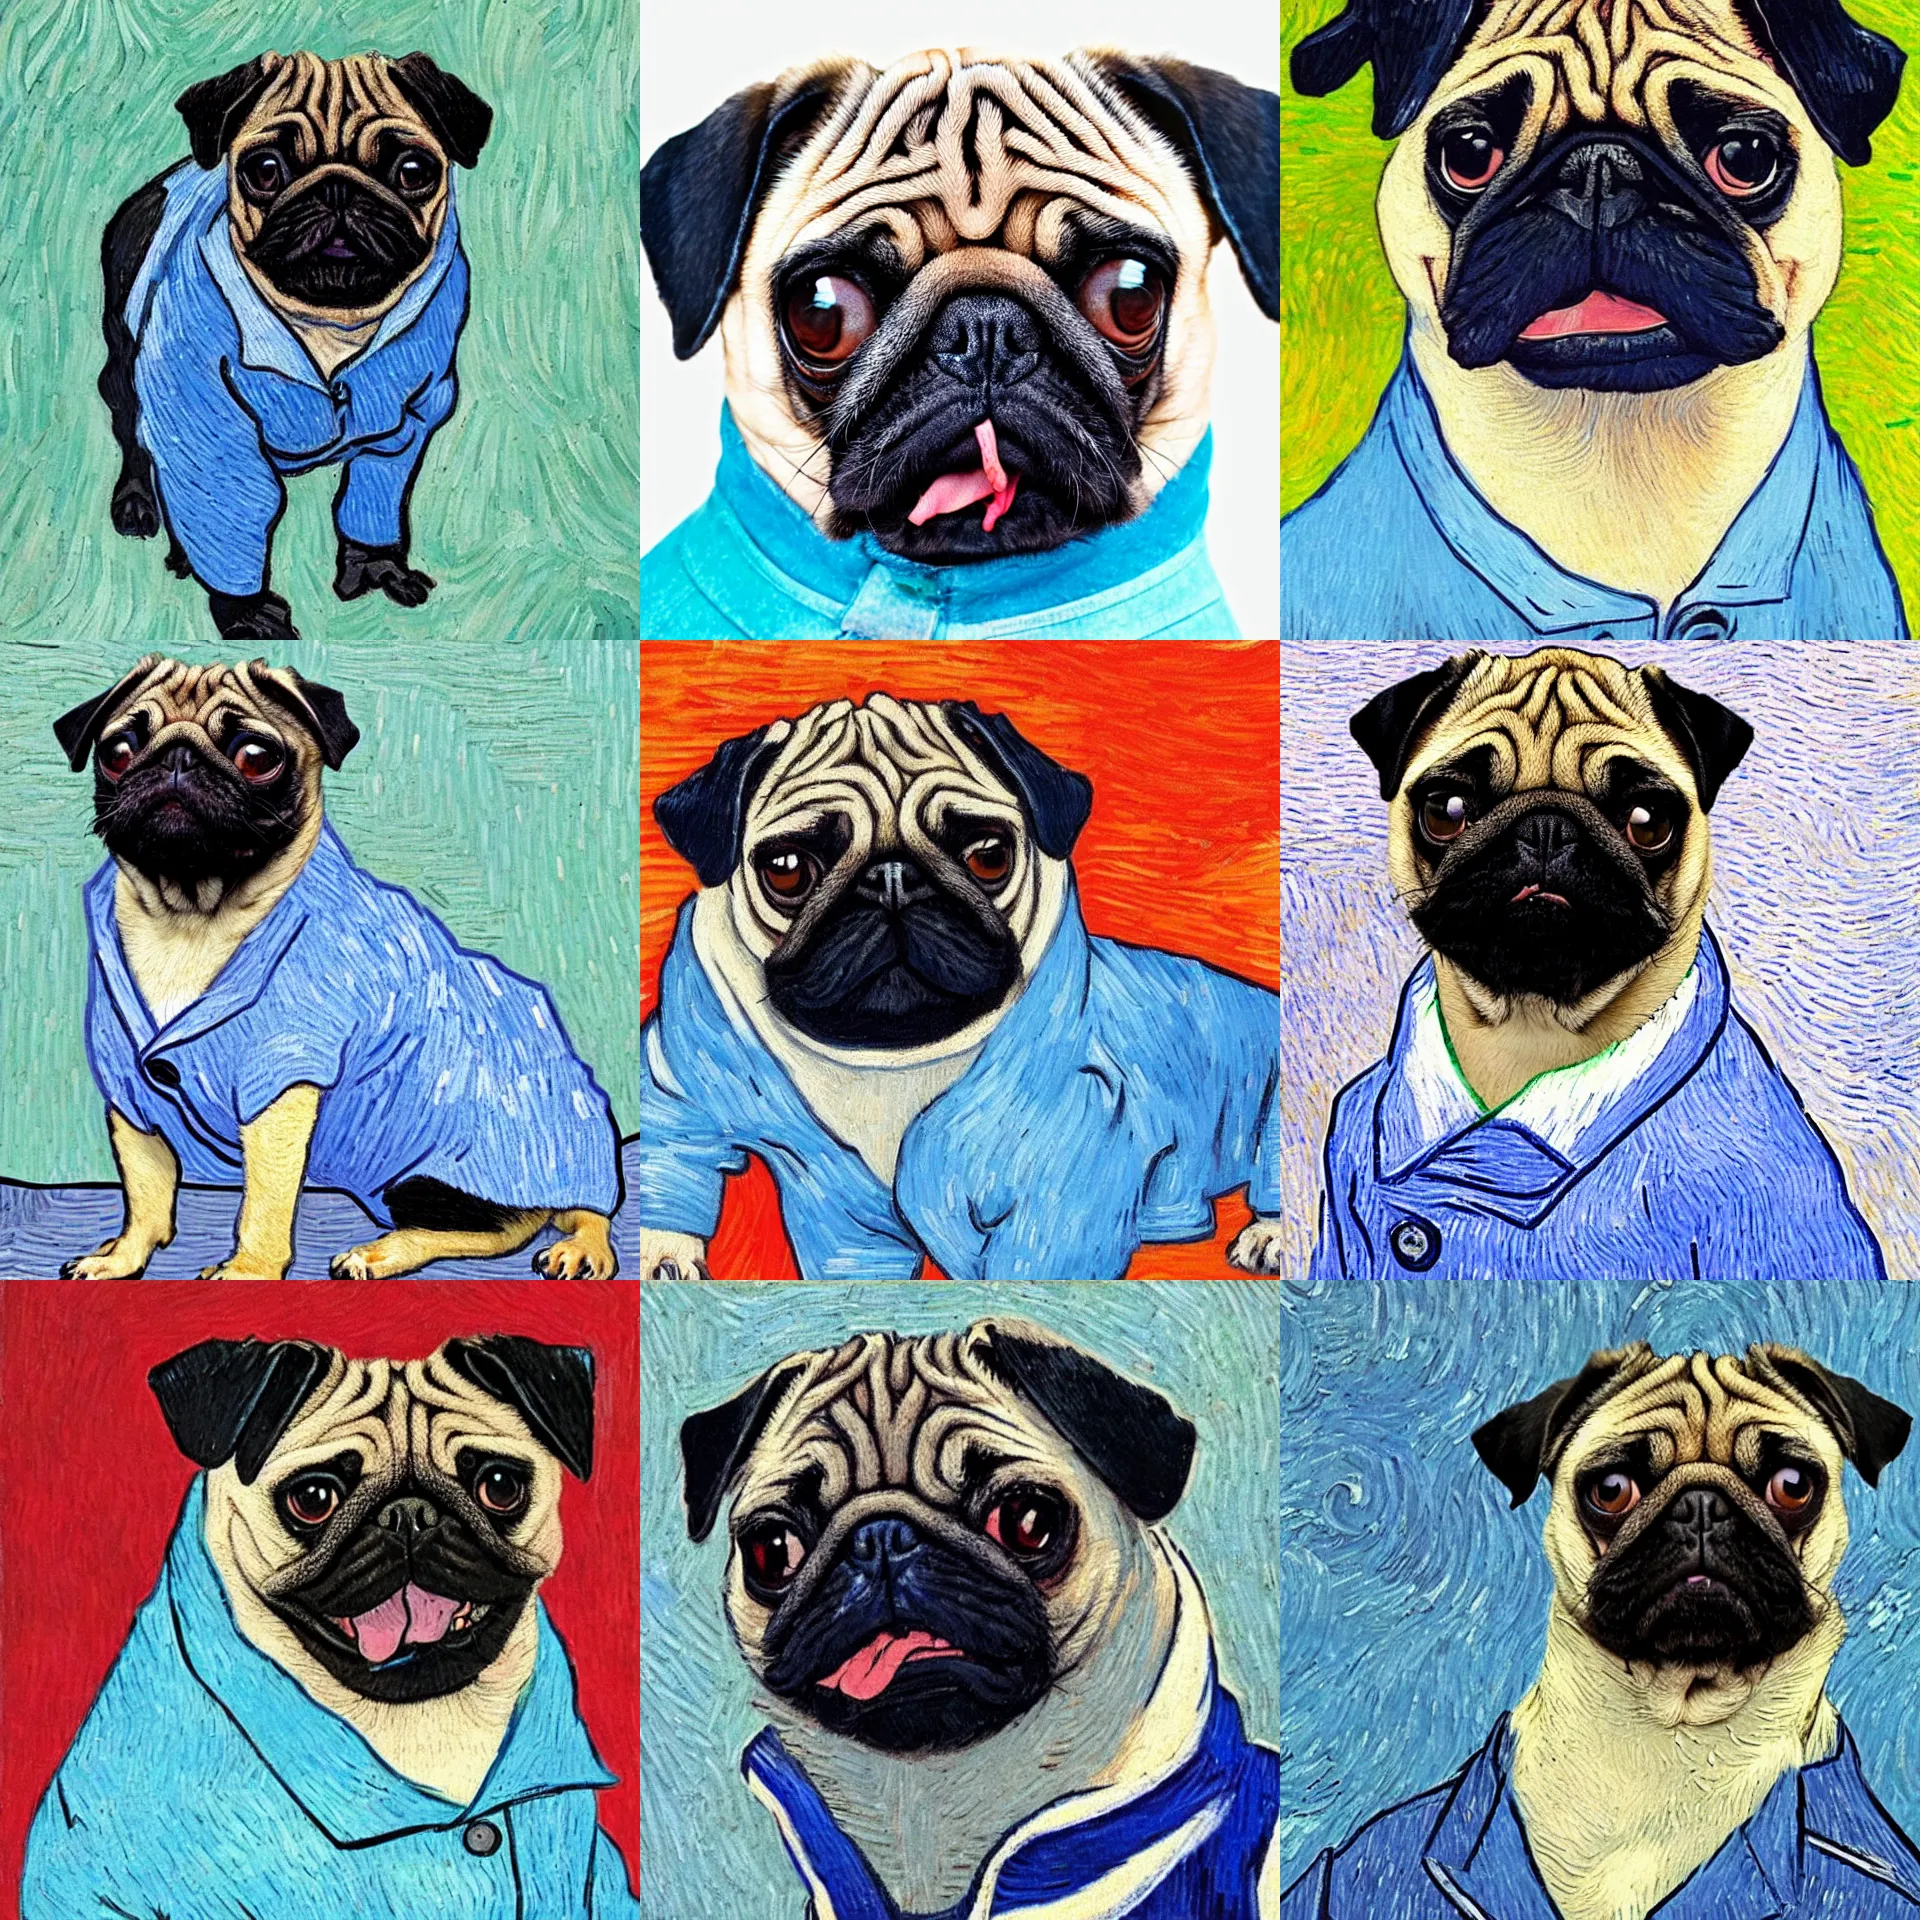 Prompt: a confused pug sticking his tongue out, wearing a blue jacket and white shirt, in the style of Van Gogh